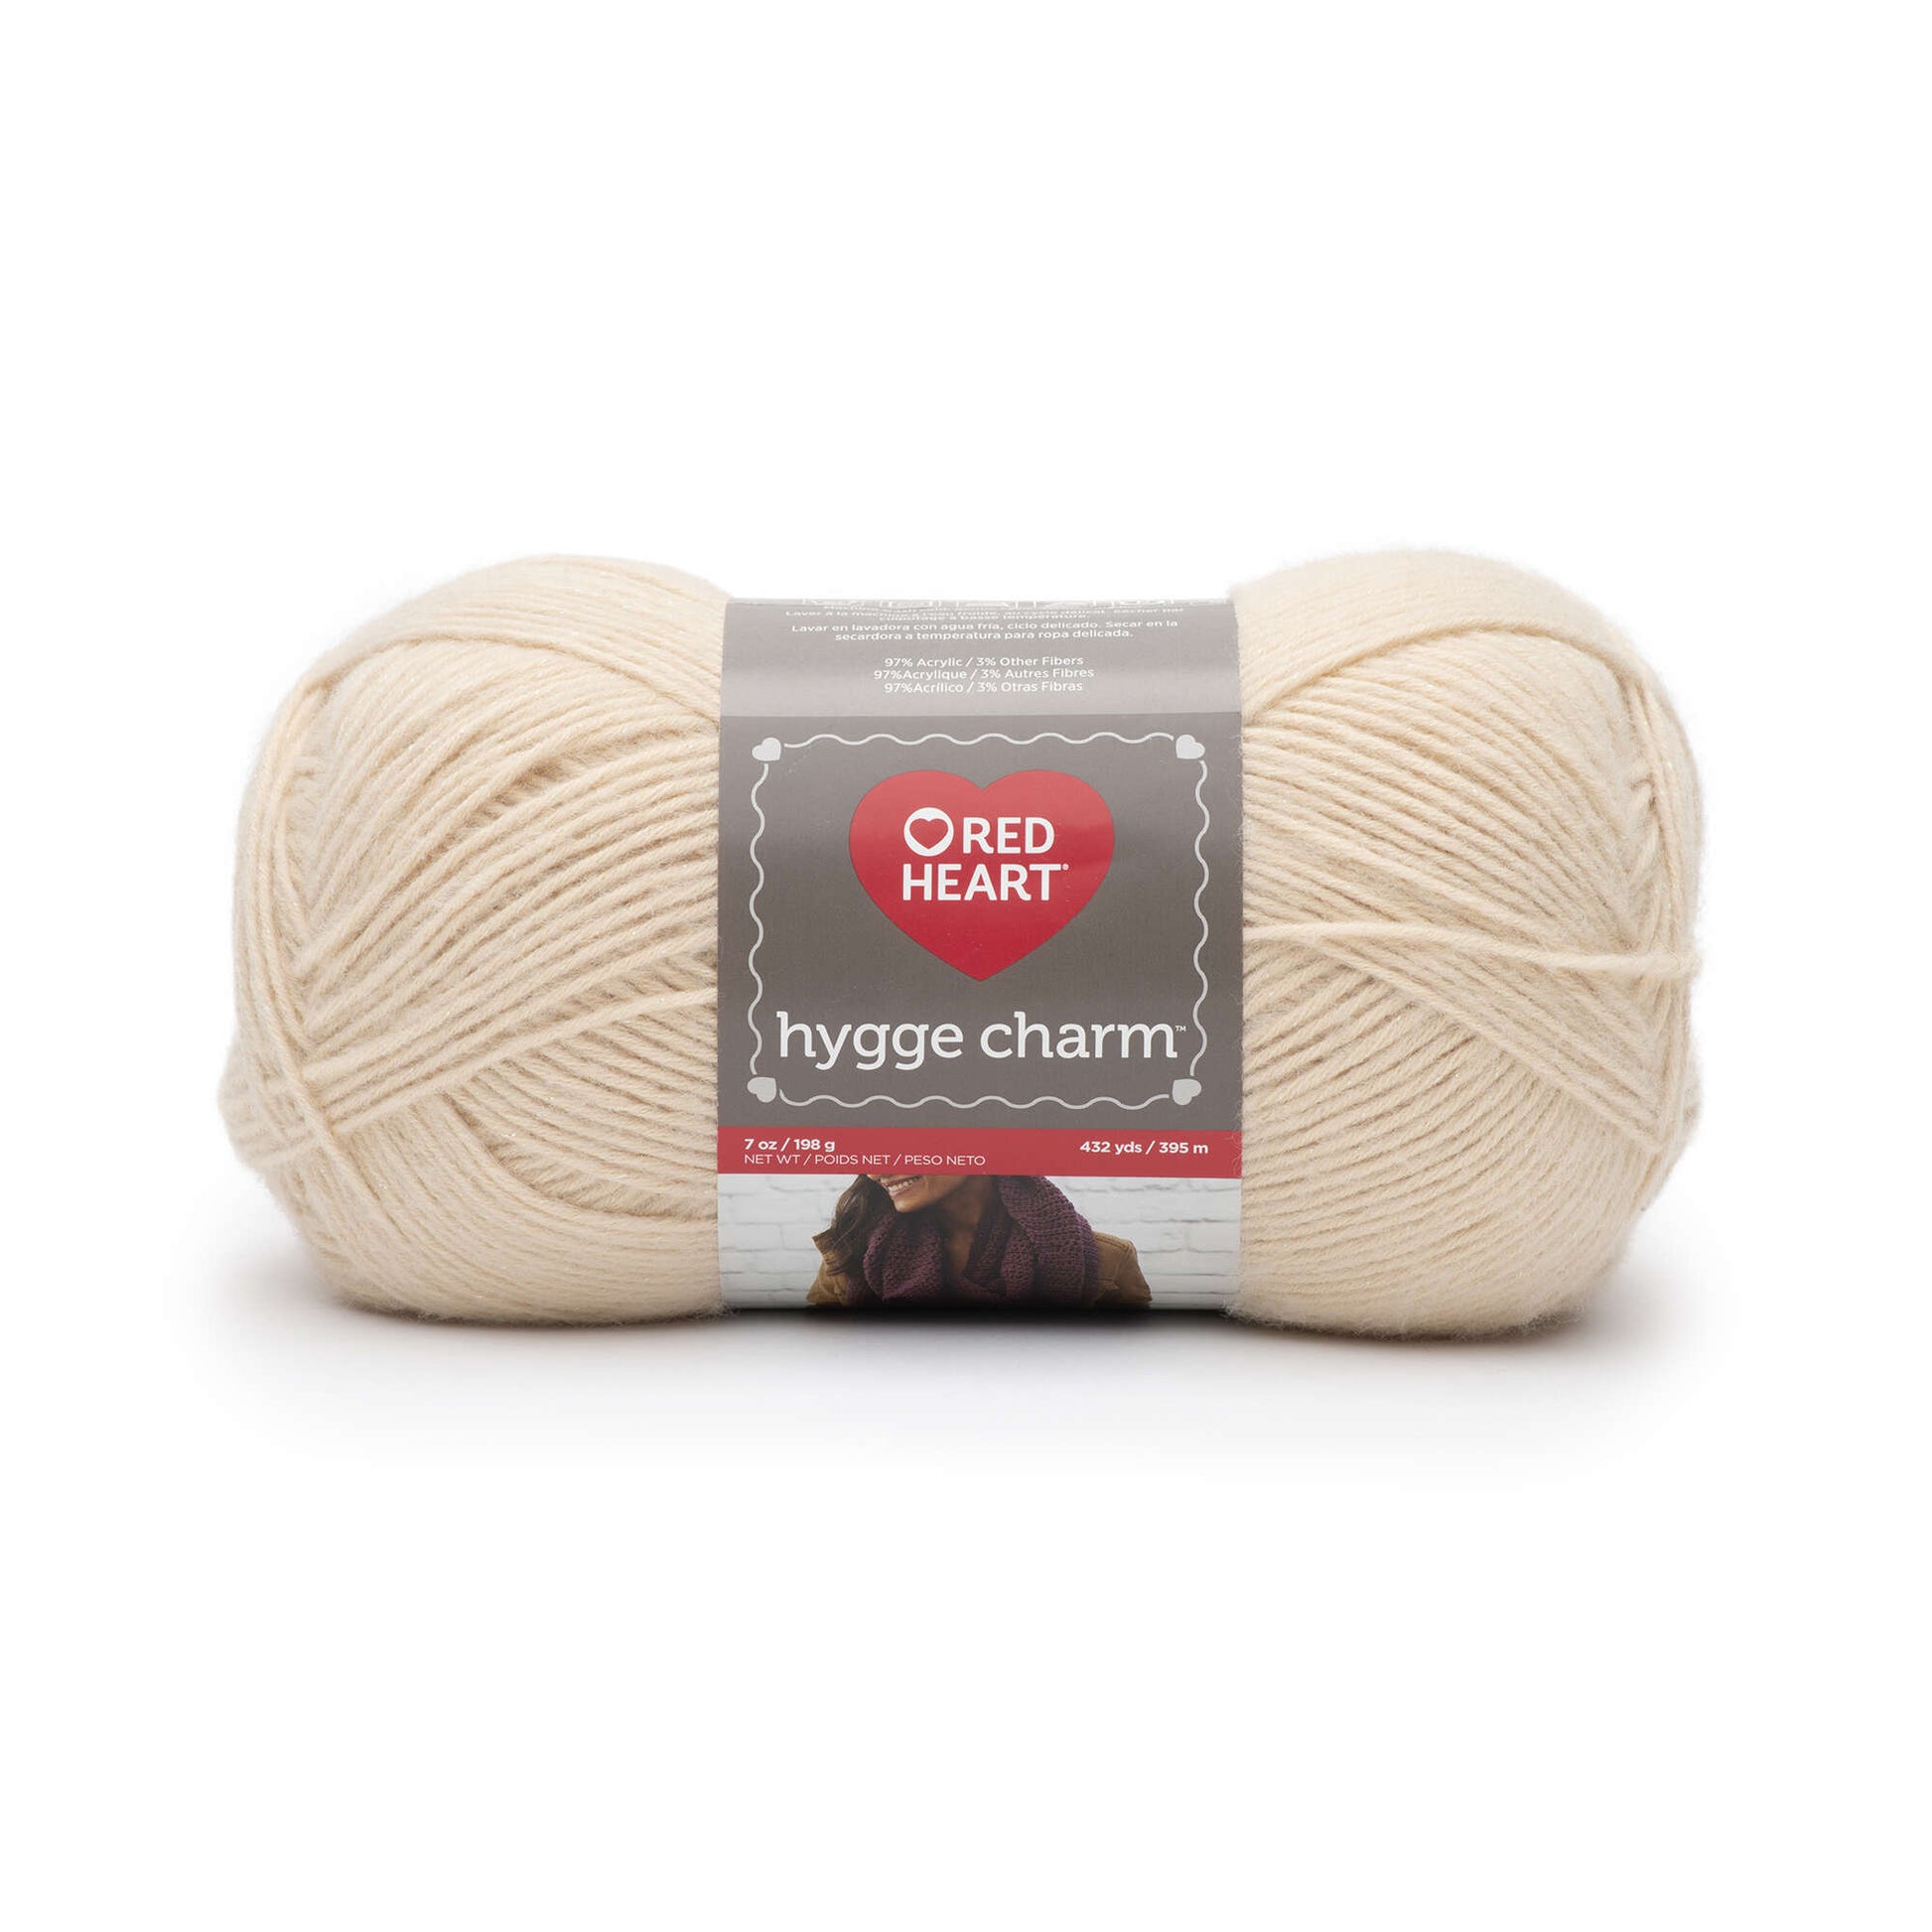 Red Heart Hygge Charm Yarn - Clearance shades Moonlight